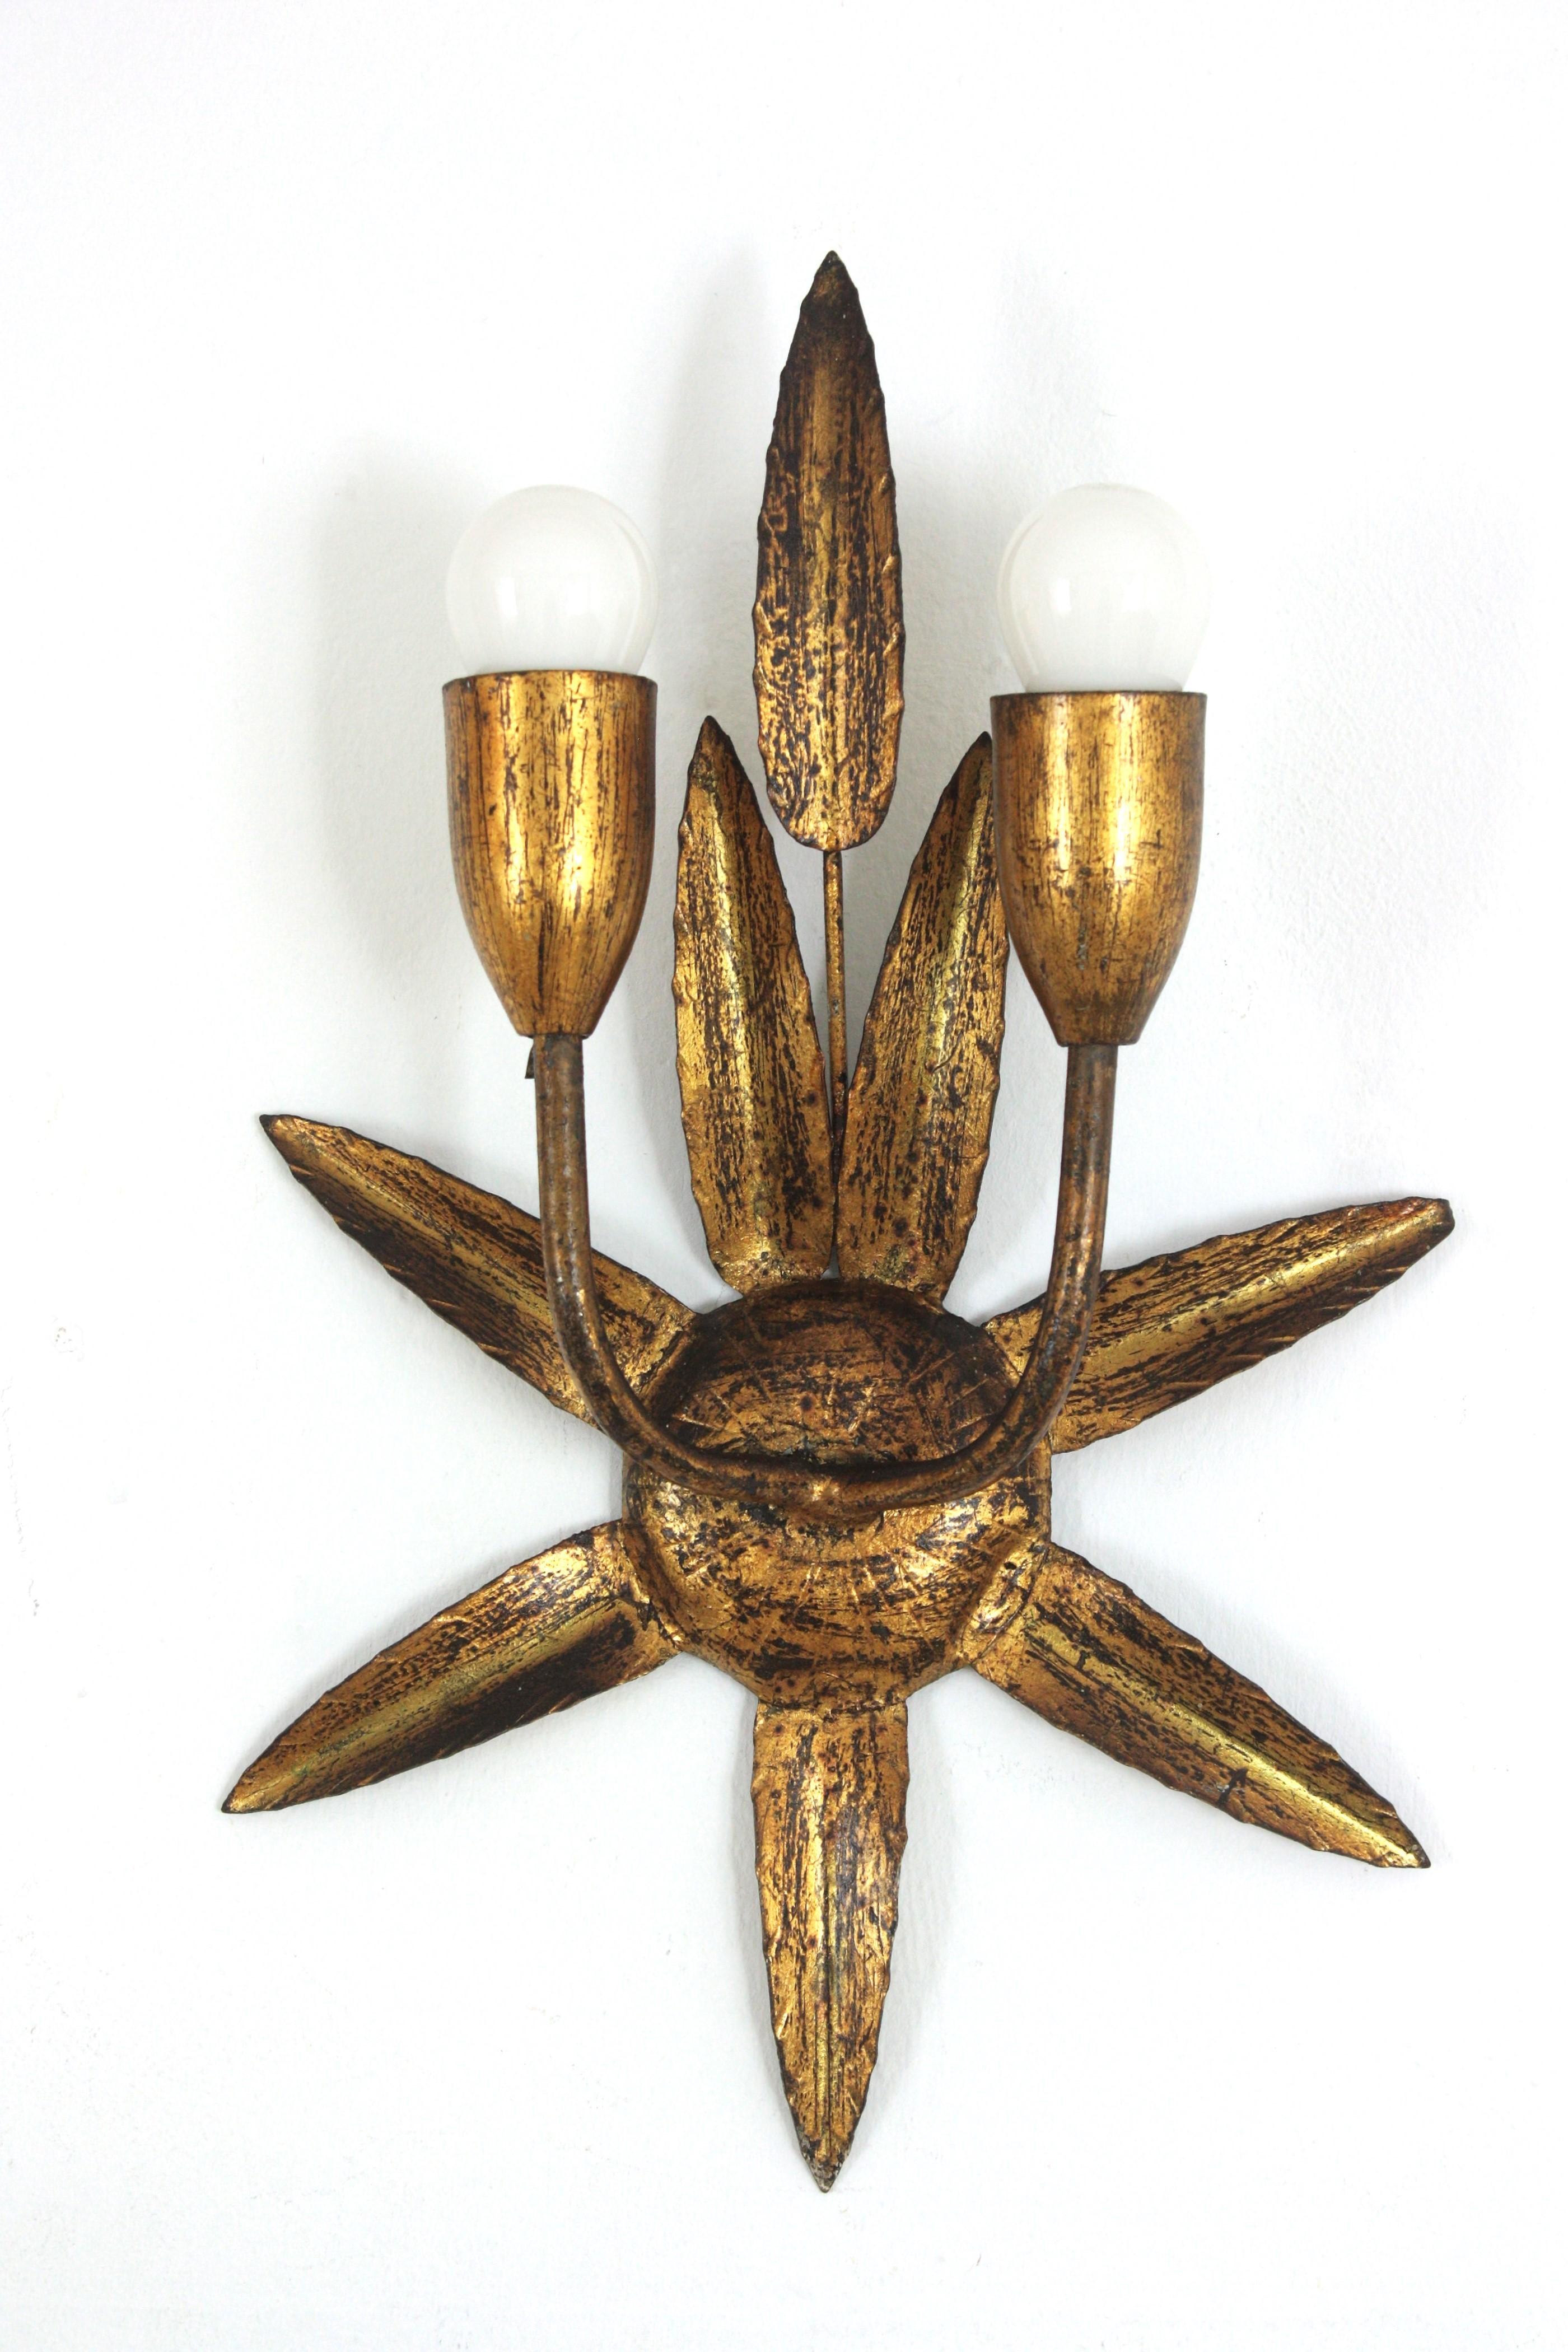 Spanish Gilt Iron Wall Sconce with Foliage Design and Starburst Backplate, 1950s For Sale 5